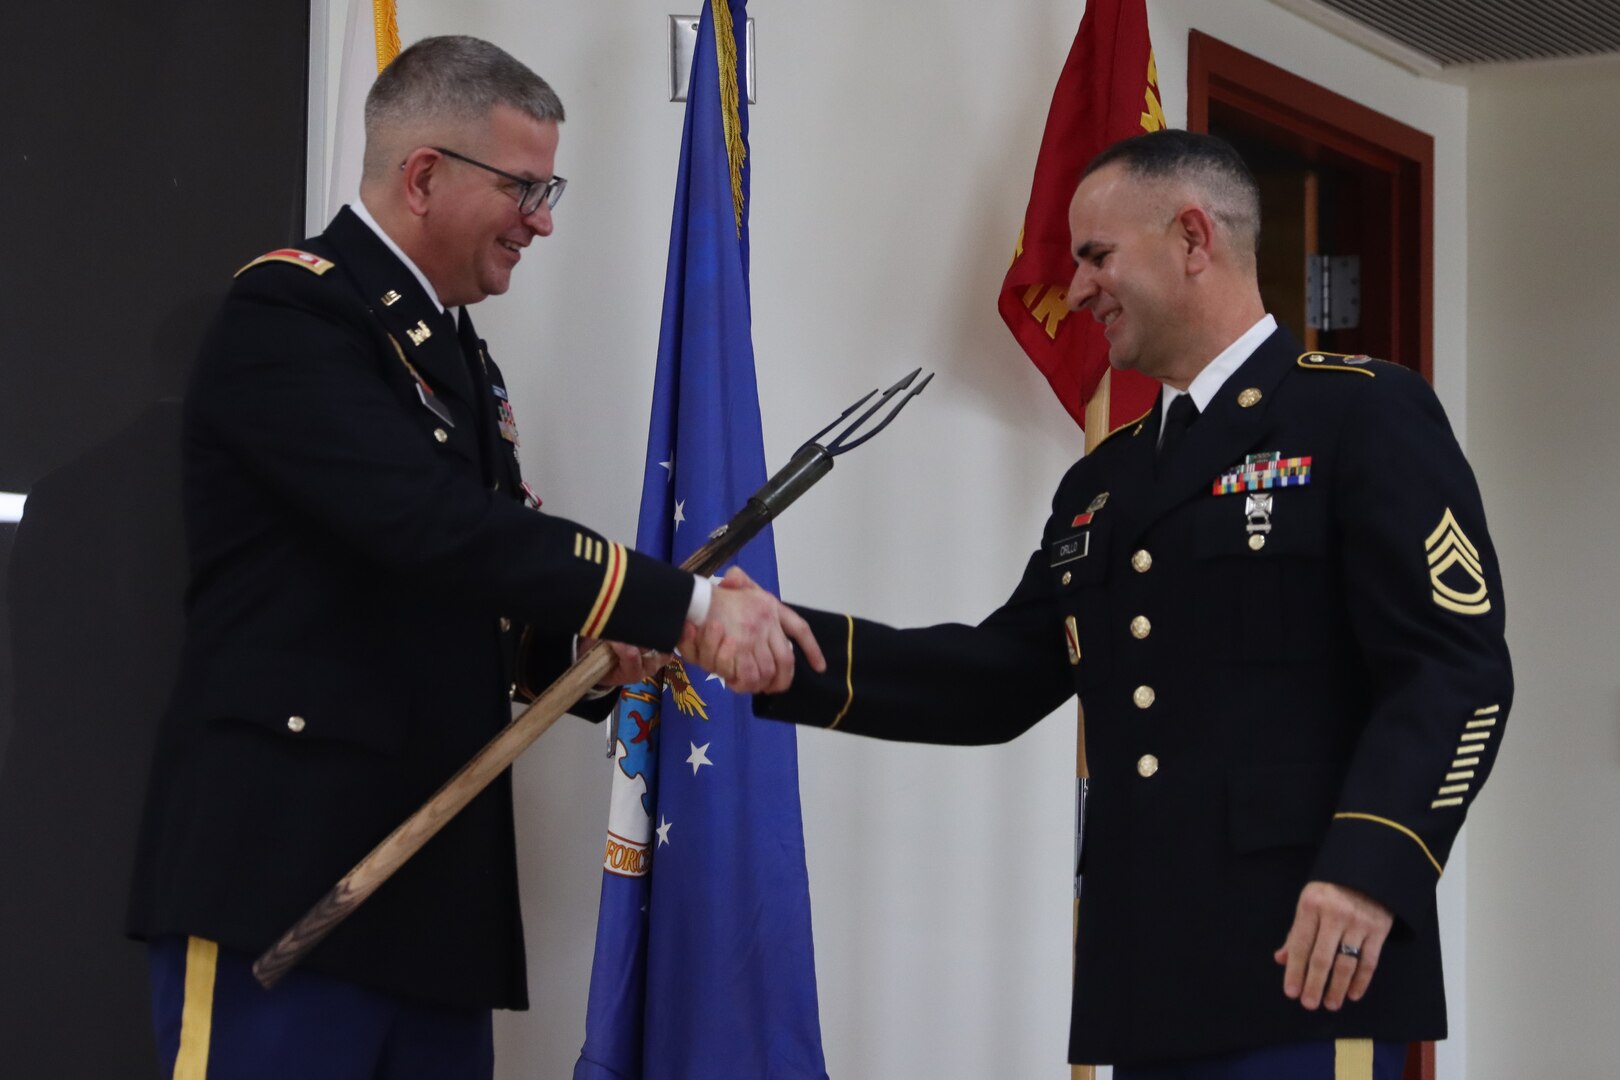 VNG State Military Reservation welcomes Huffman as new commander